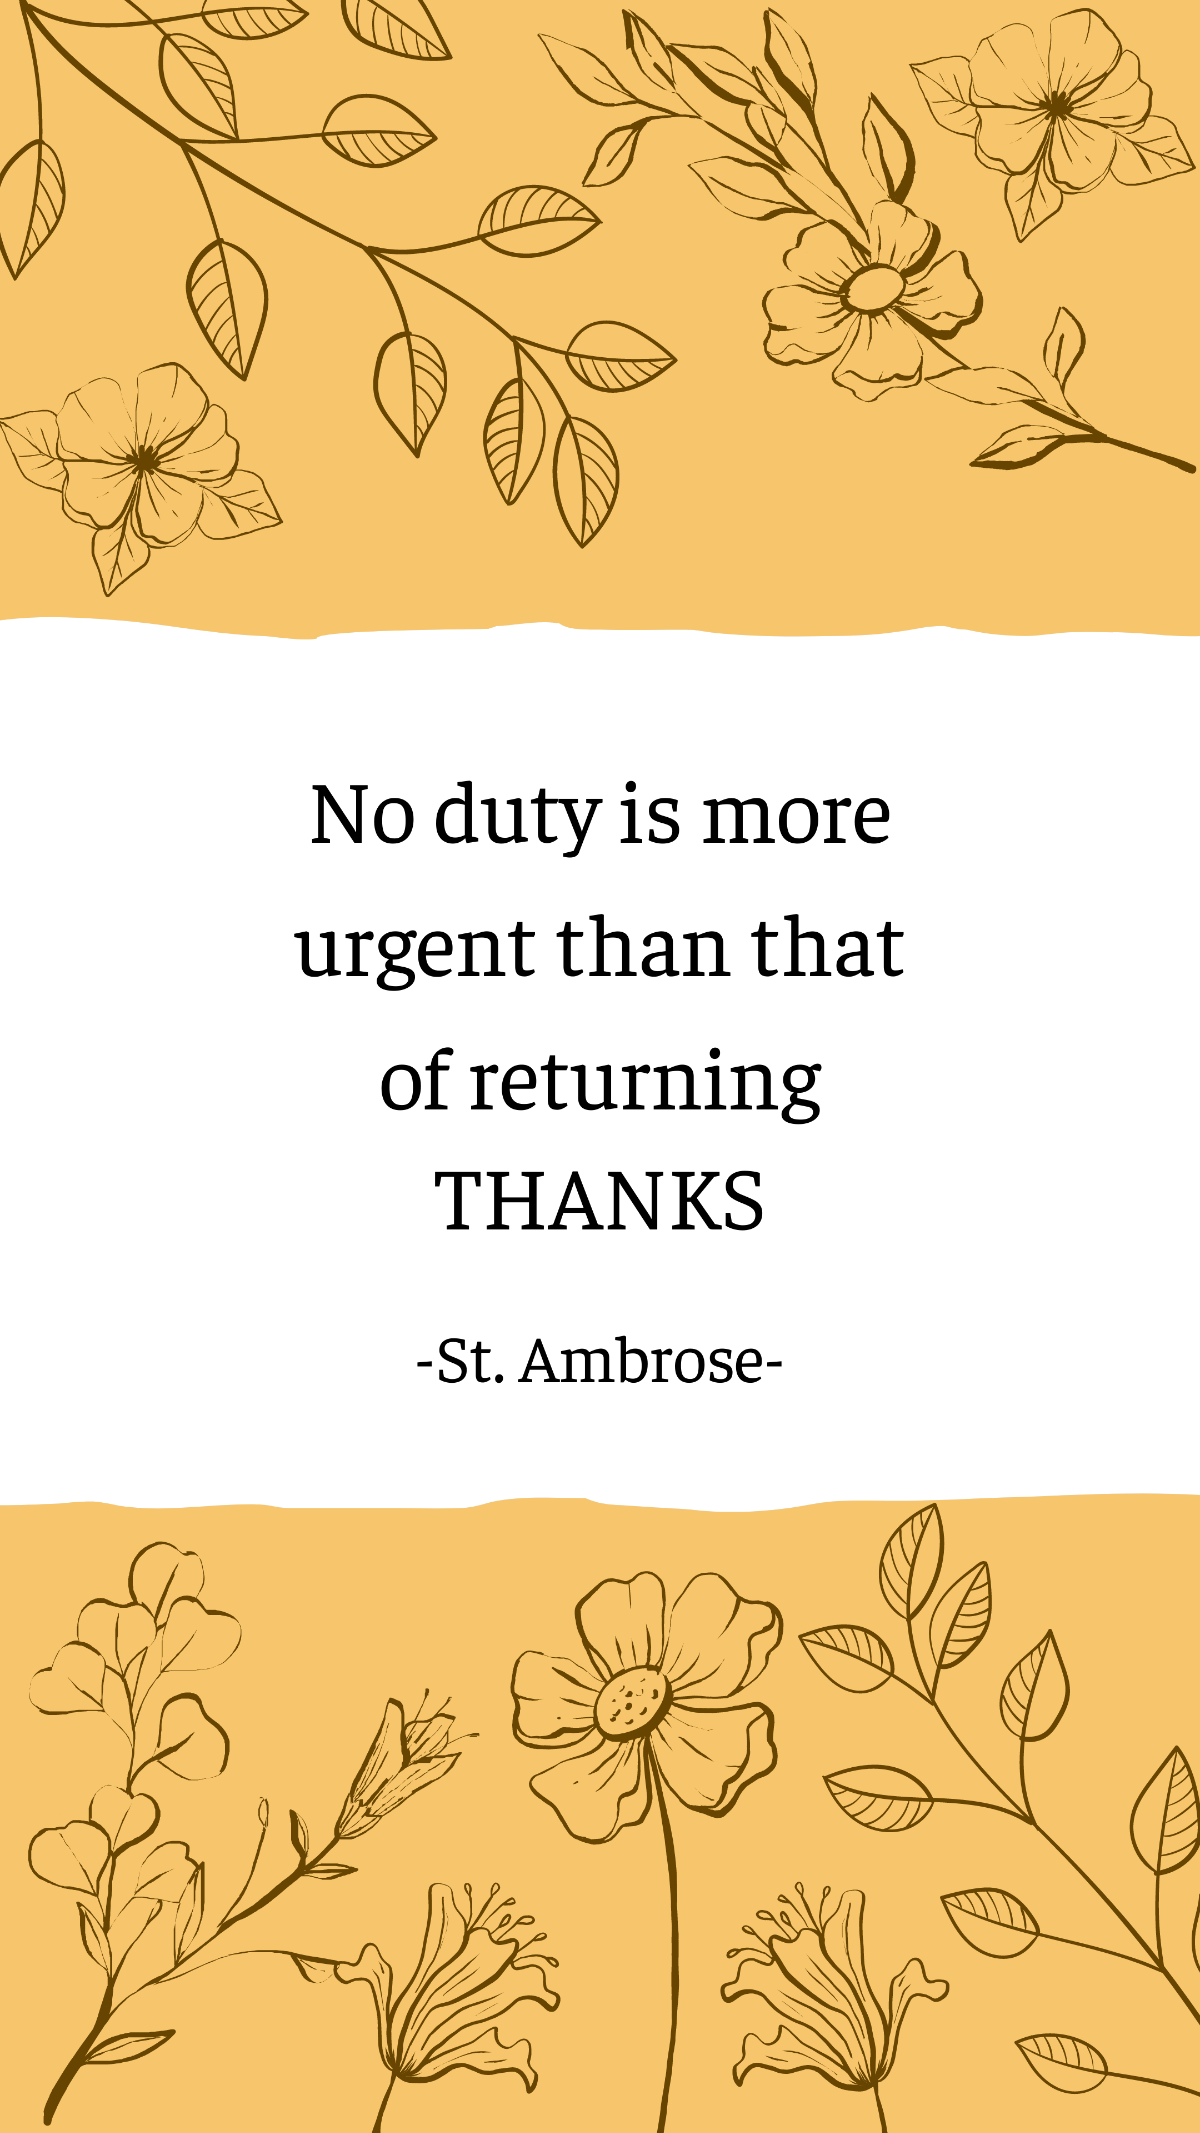 St. Ambrose - No duty is more urgent than that of returning thanks